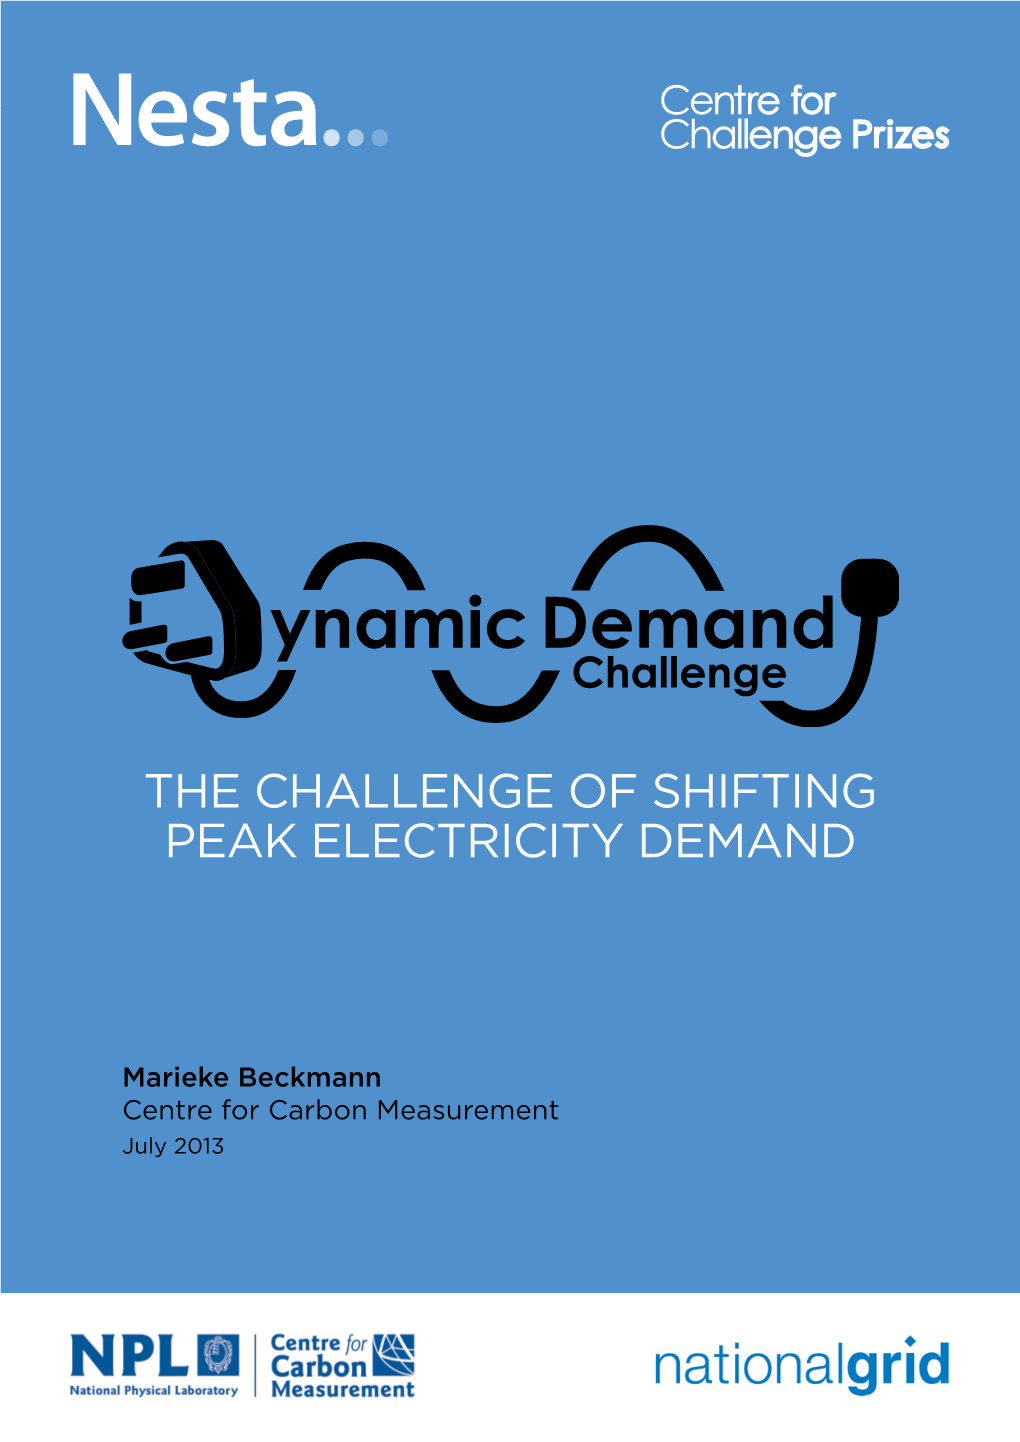 The Challenge of Shifting Peak Electricity Demand